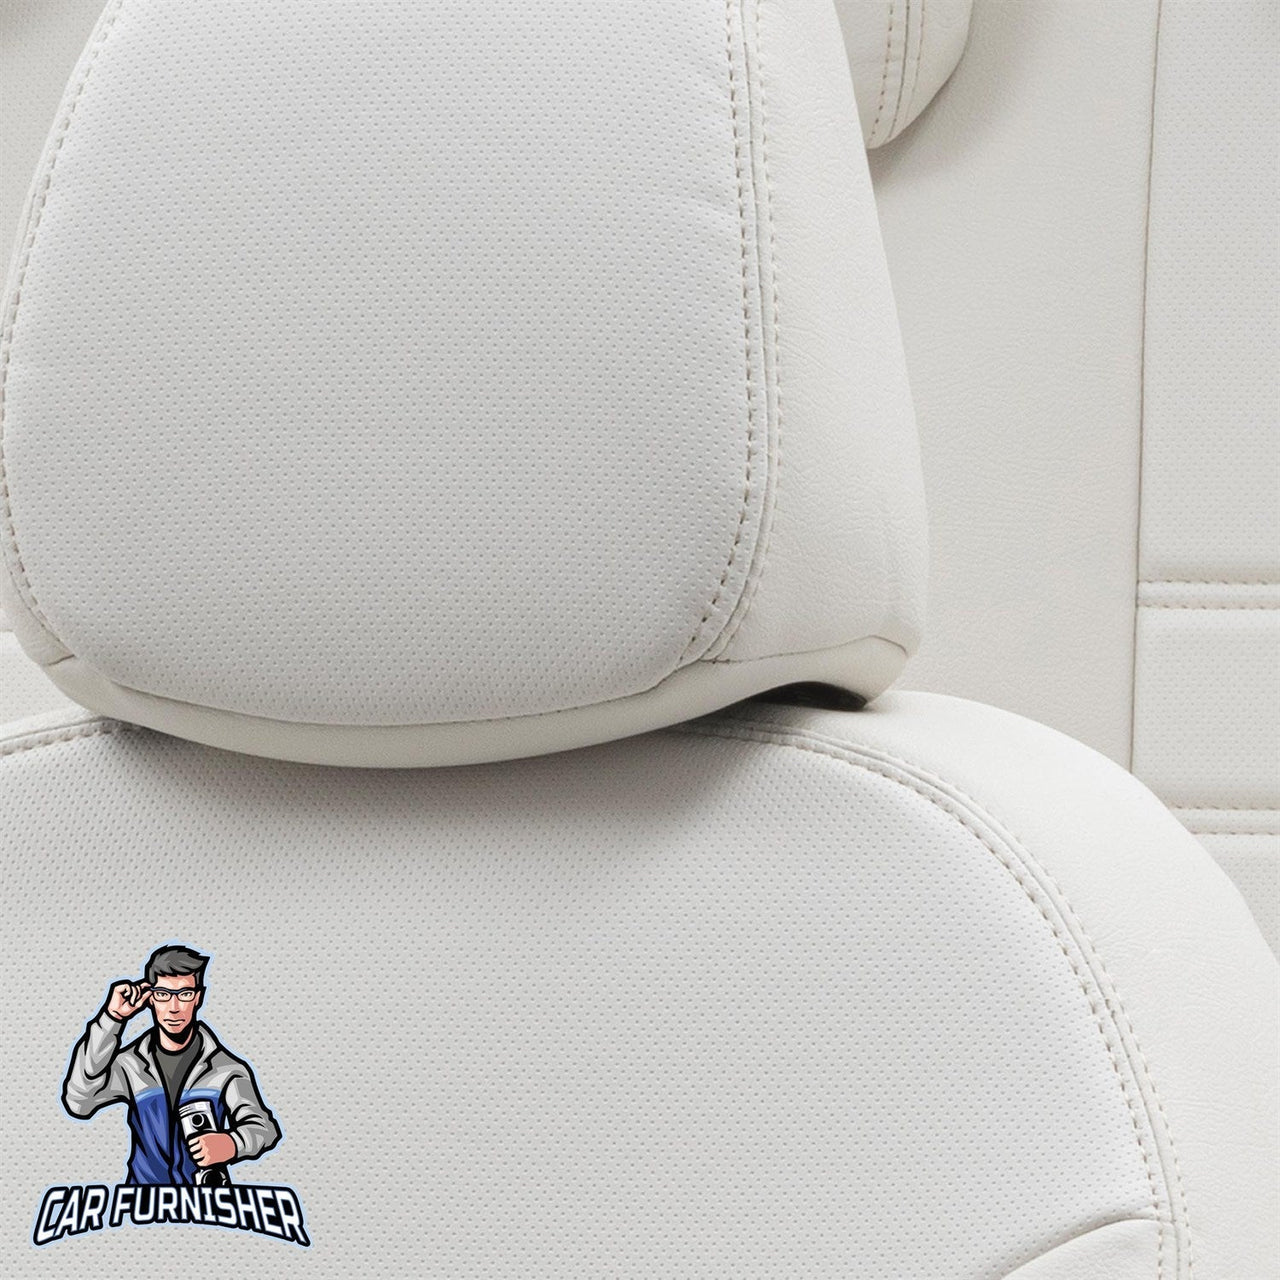 Fiat Punto Seat Covers Istanbul Leather Design Ivory Leather